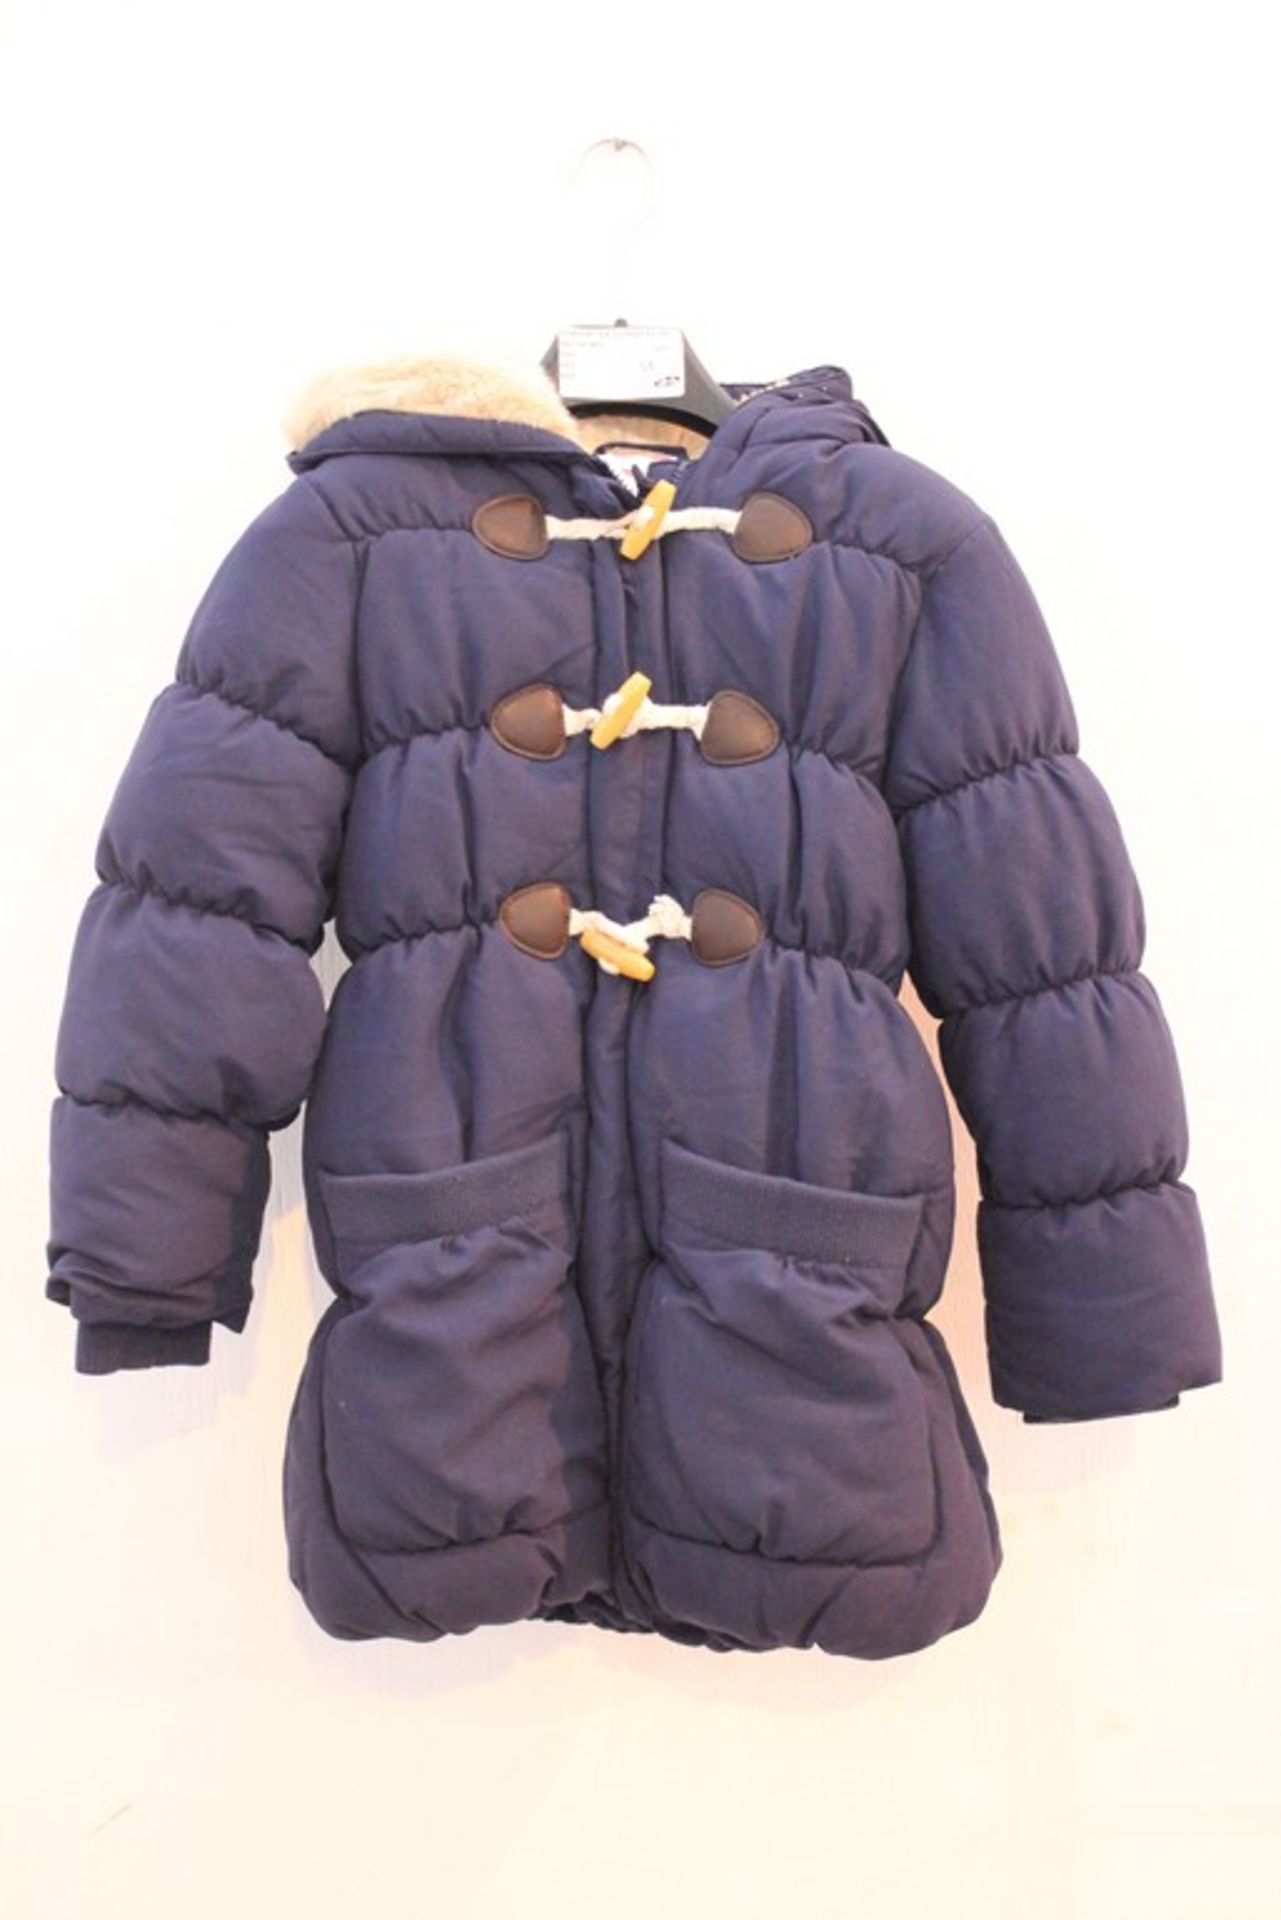 1 x CHILDRENS WINTERCOAT IN BLUE SIZE 8 (23.3.15)  *PLEASE NOTE THAT THE BID PRICE IS MULTIPLIED